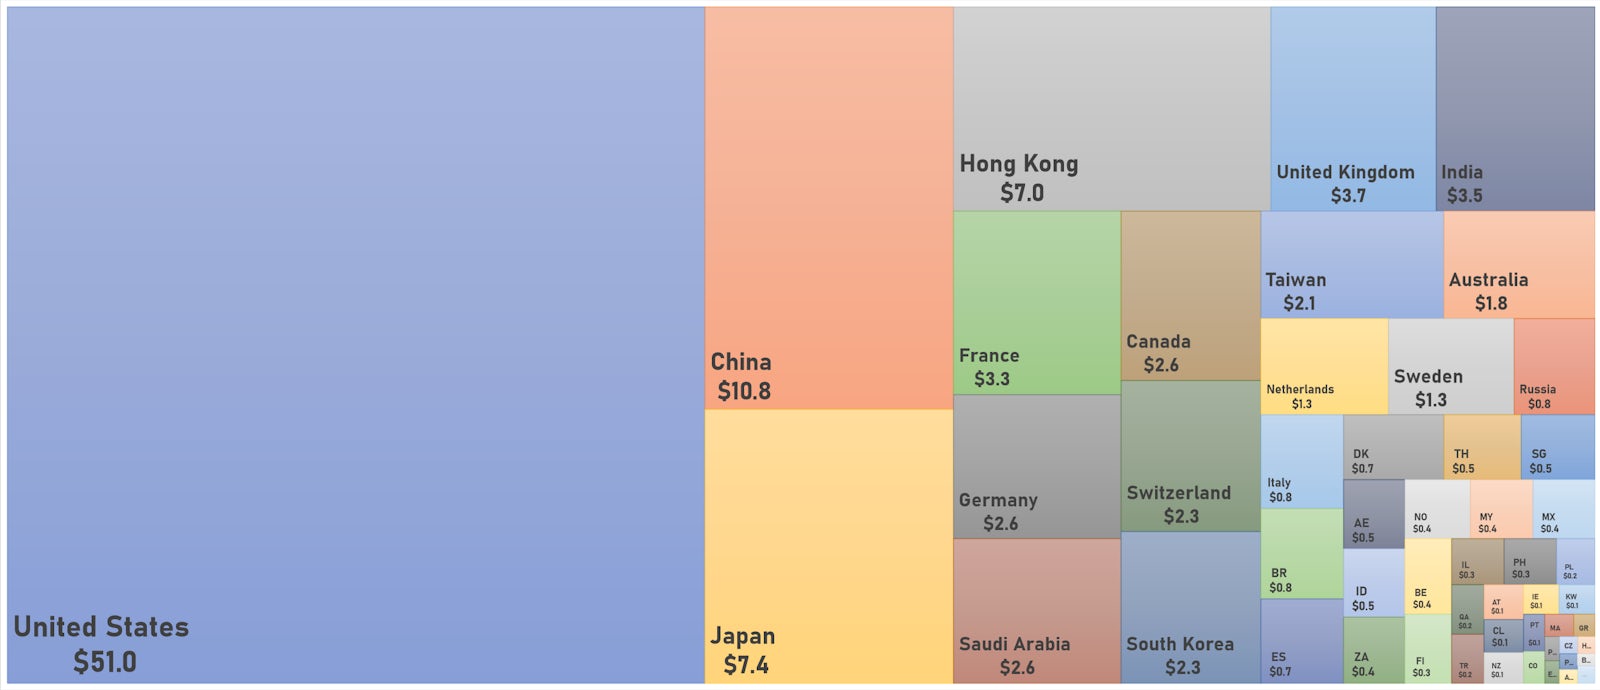 World Market Capitalization Broken Down By Country | Sources: ϕpost, FactSet data